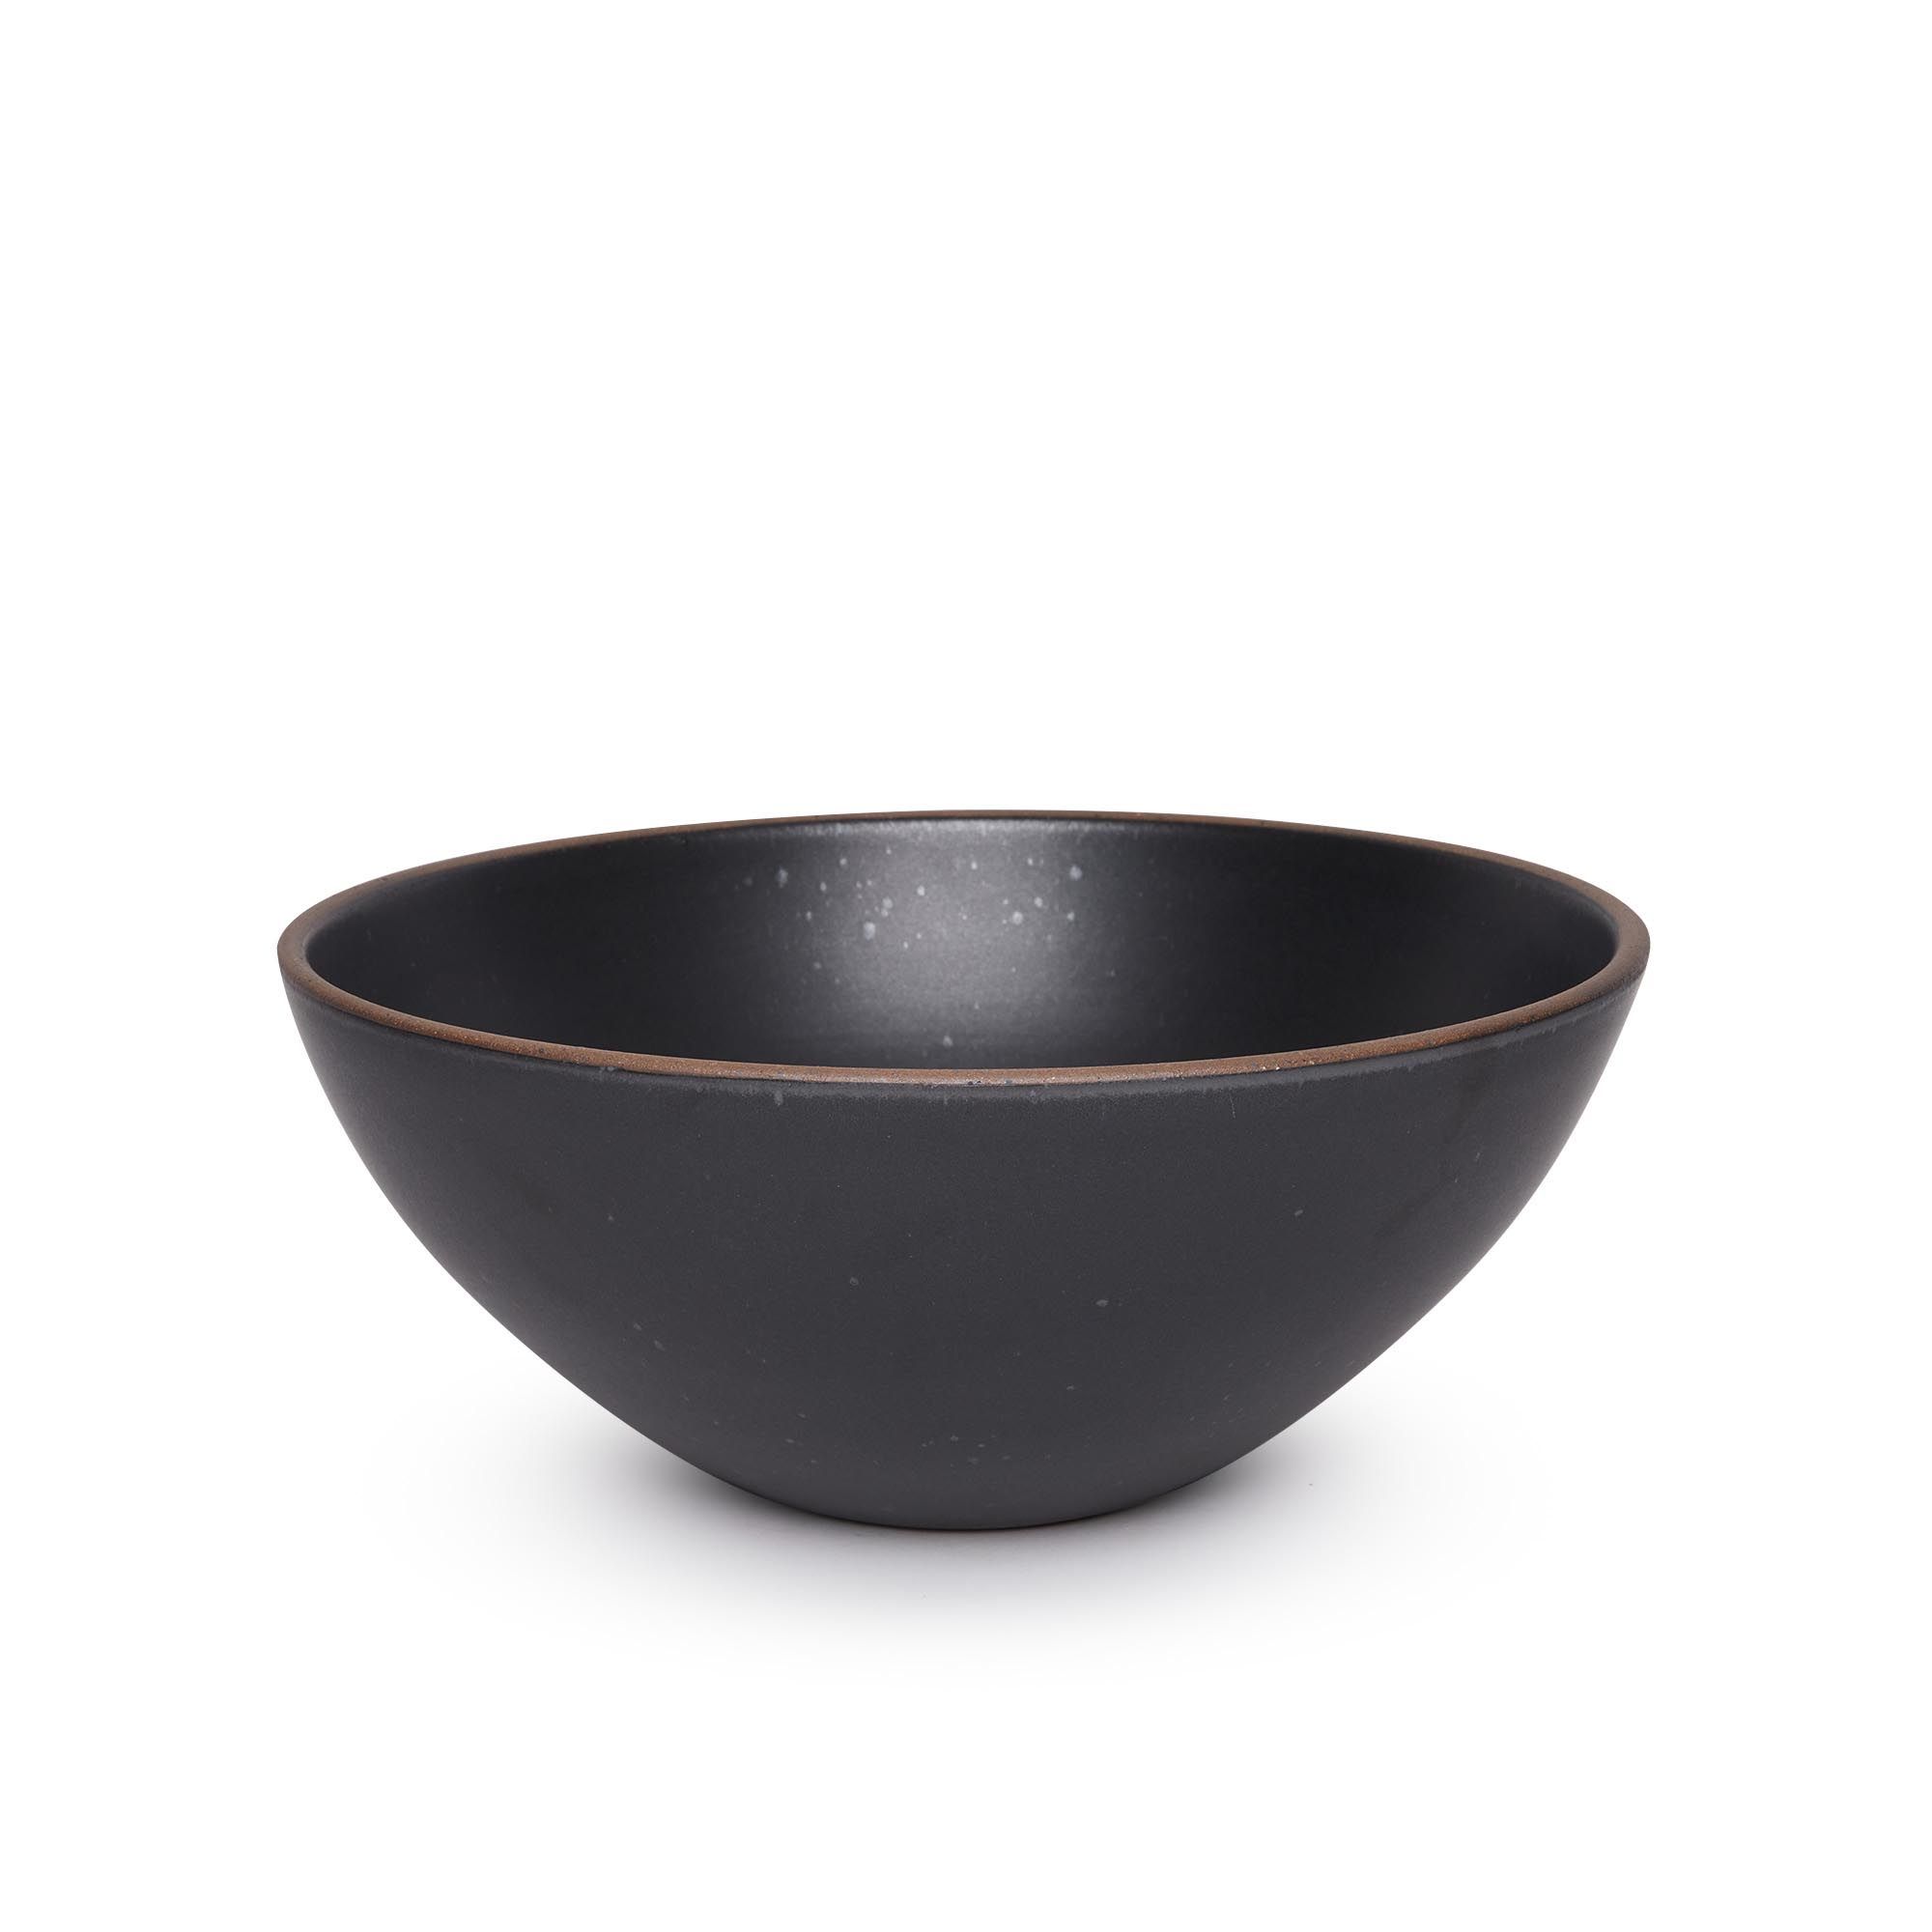 A large ceramic mixing bowl in a graphite black color featuring iron speckles and an unglazed rim